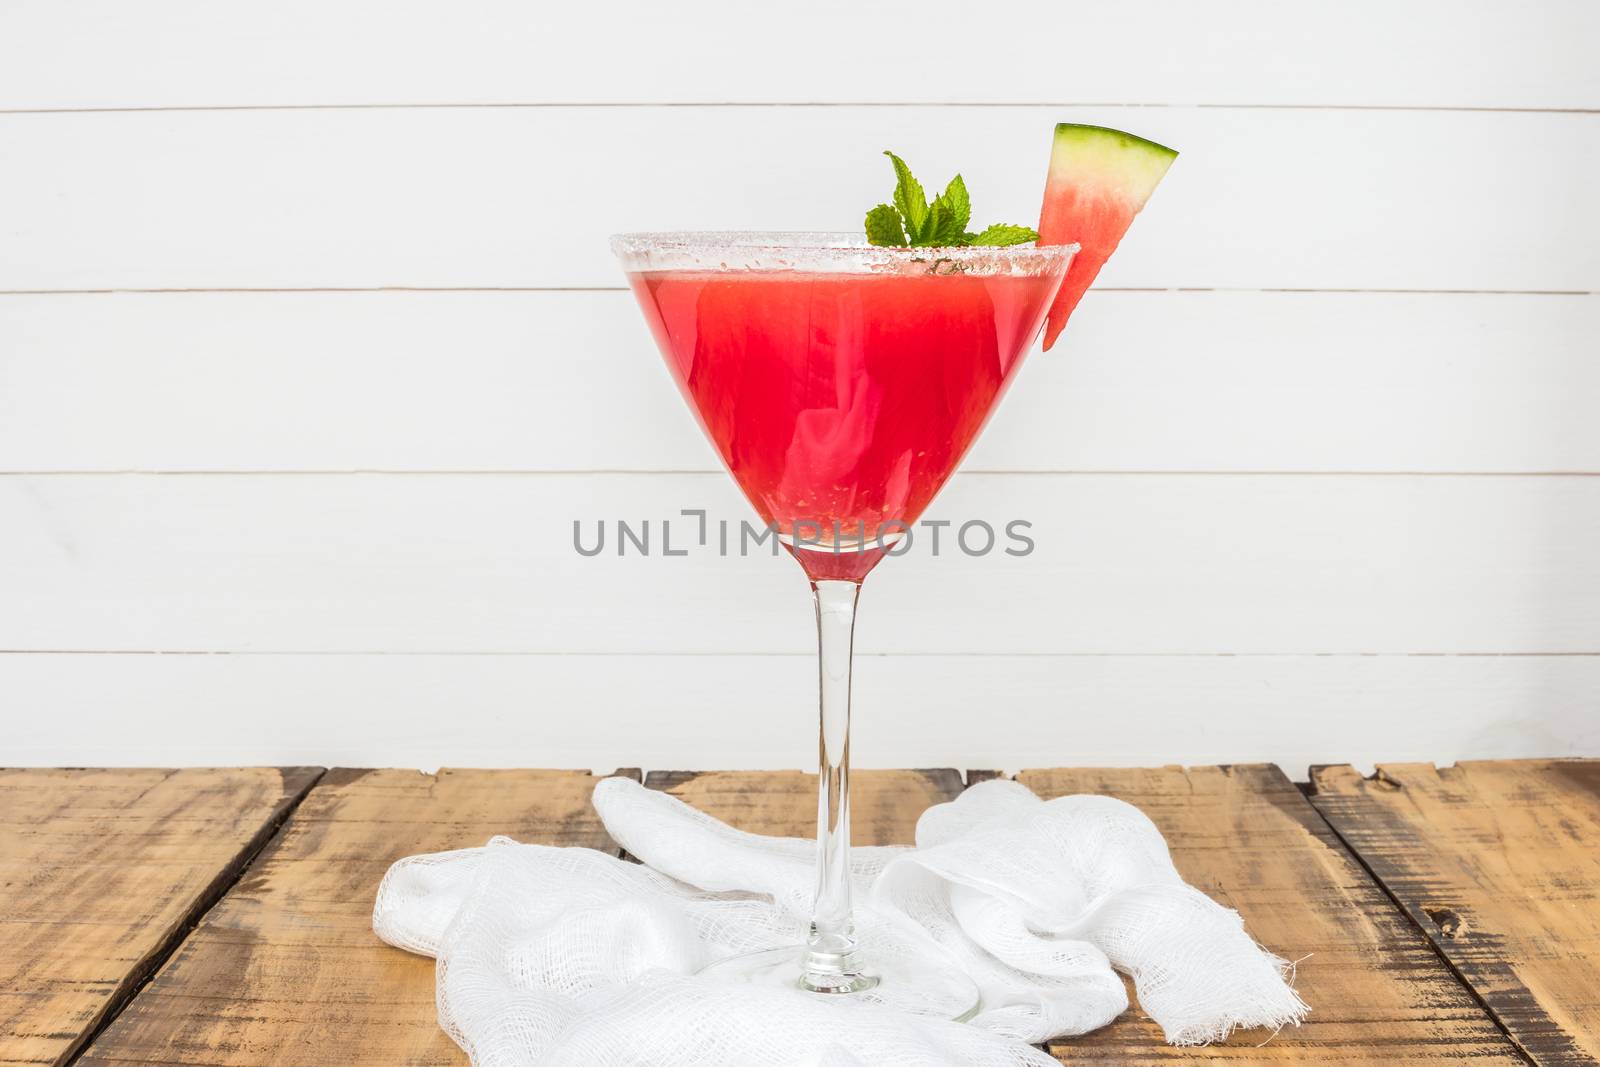 Watermelon juice with mint leaves on wooden vintage background